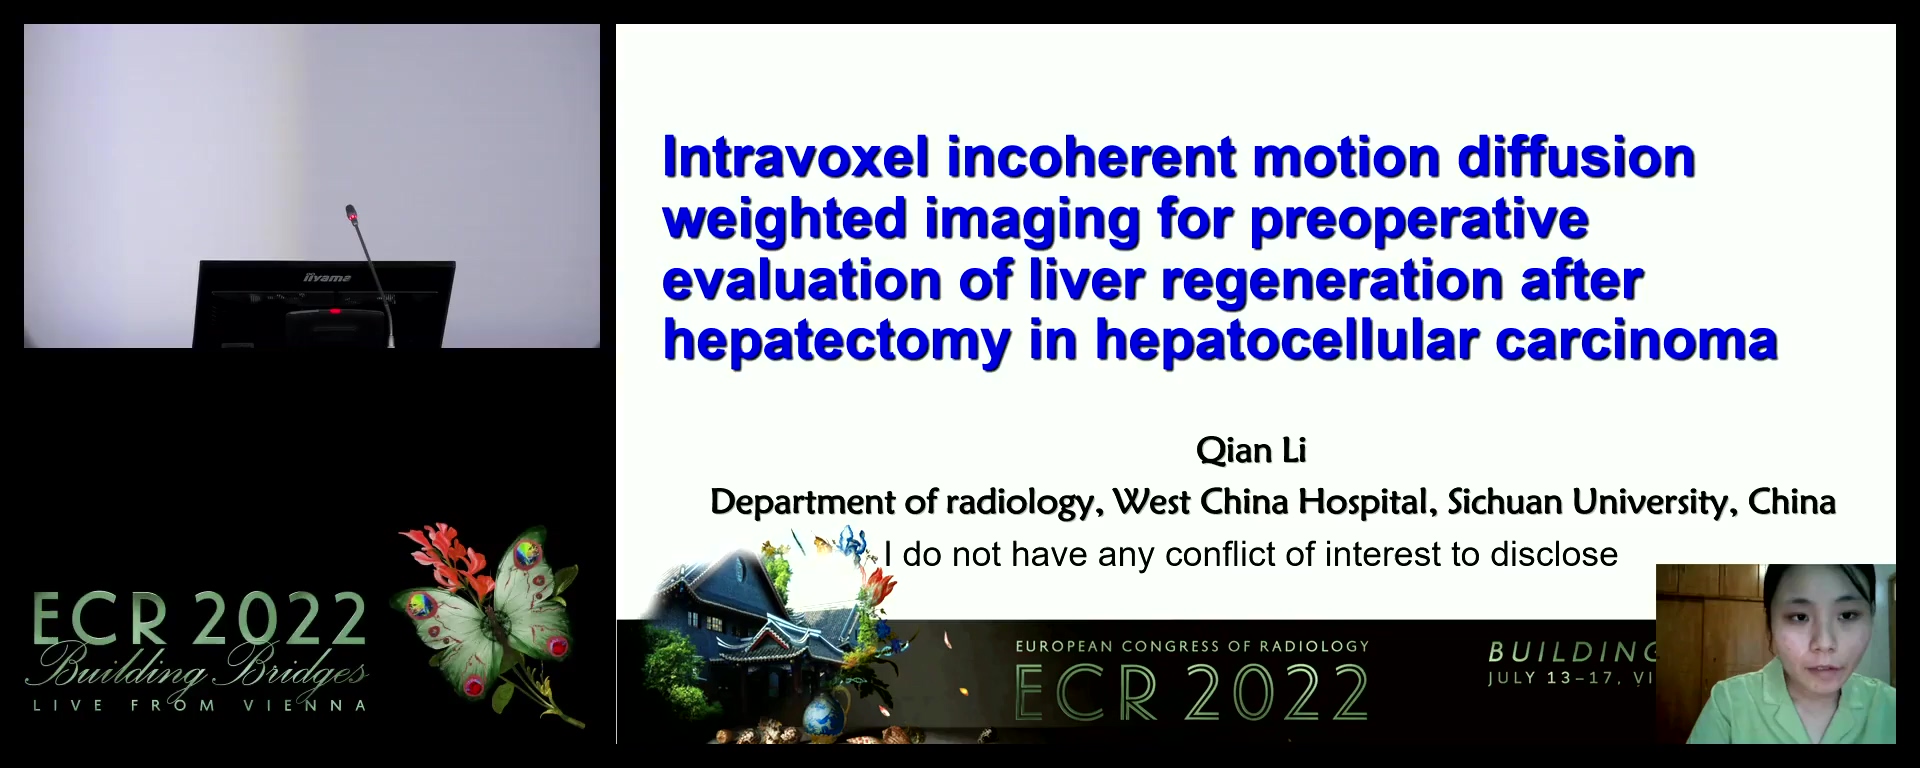 Value of intravoxel incoherent motion for preoperative evaluation of liver regeneration in hepatocellular carcinoma - Qian Li, Chengdu / CN